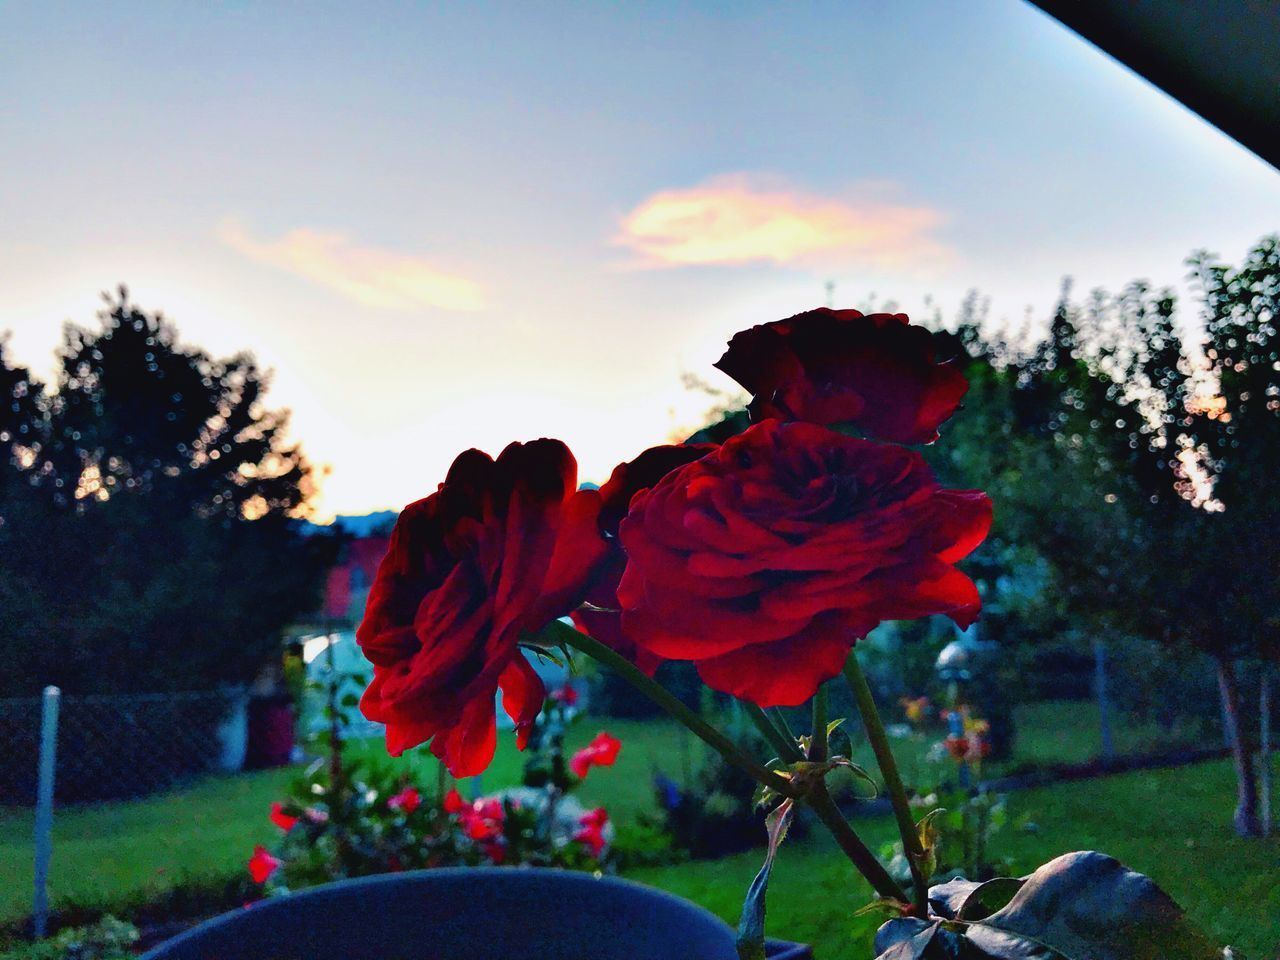 CLOSE-UP OF RED ROSE AGAINST SKY